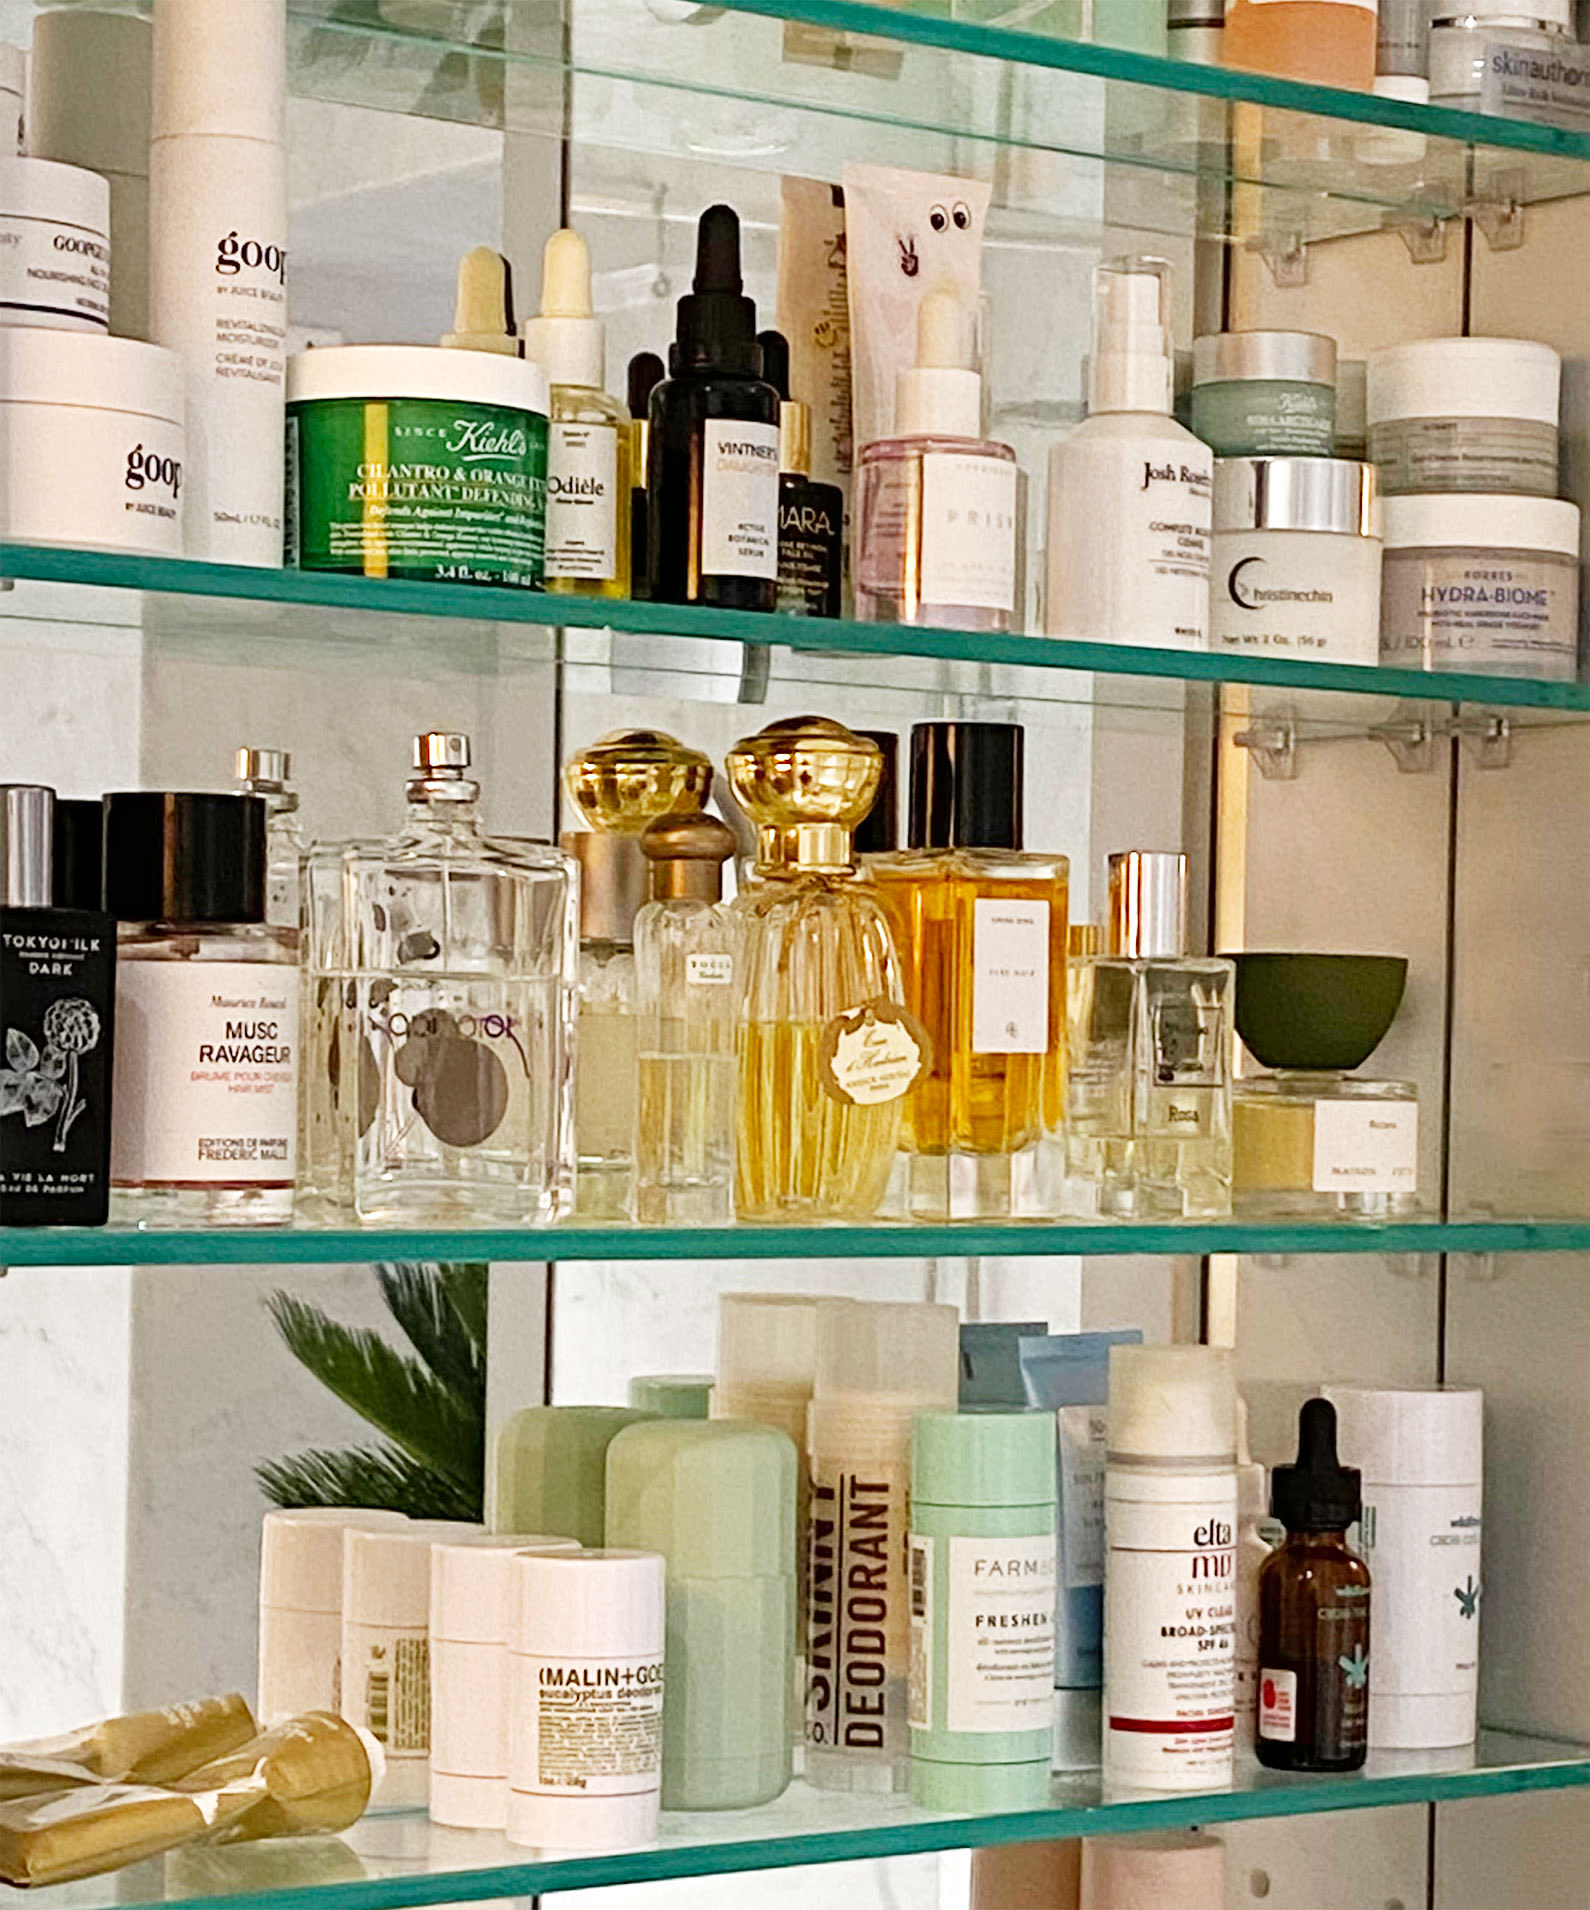 Shelfie with endocrine disrupting skincare products.